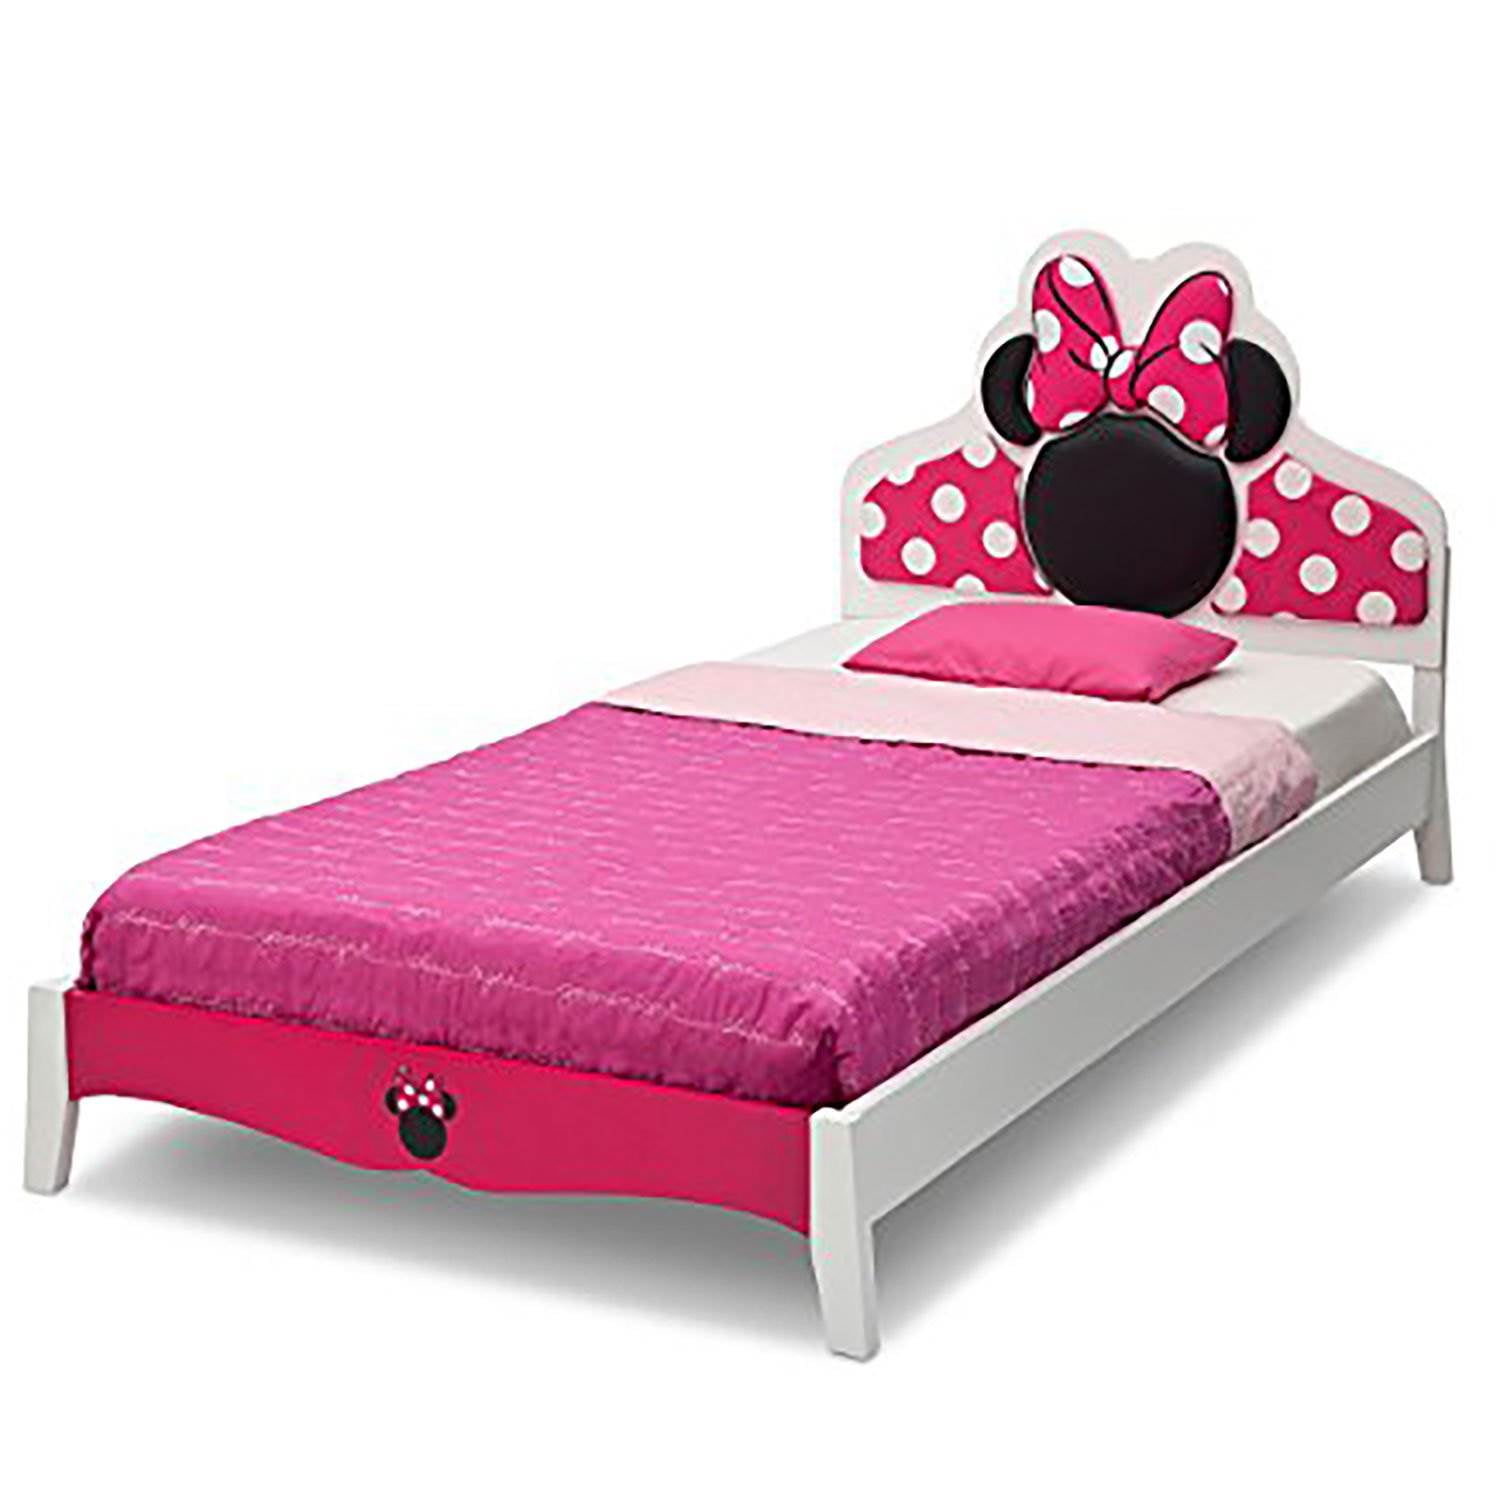 disney minnie mouse wood twin bed